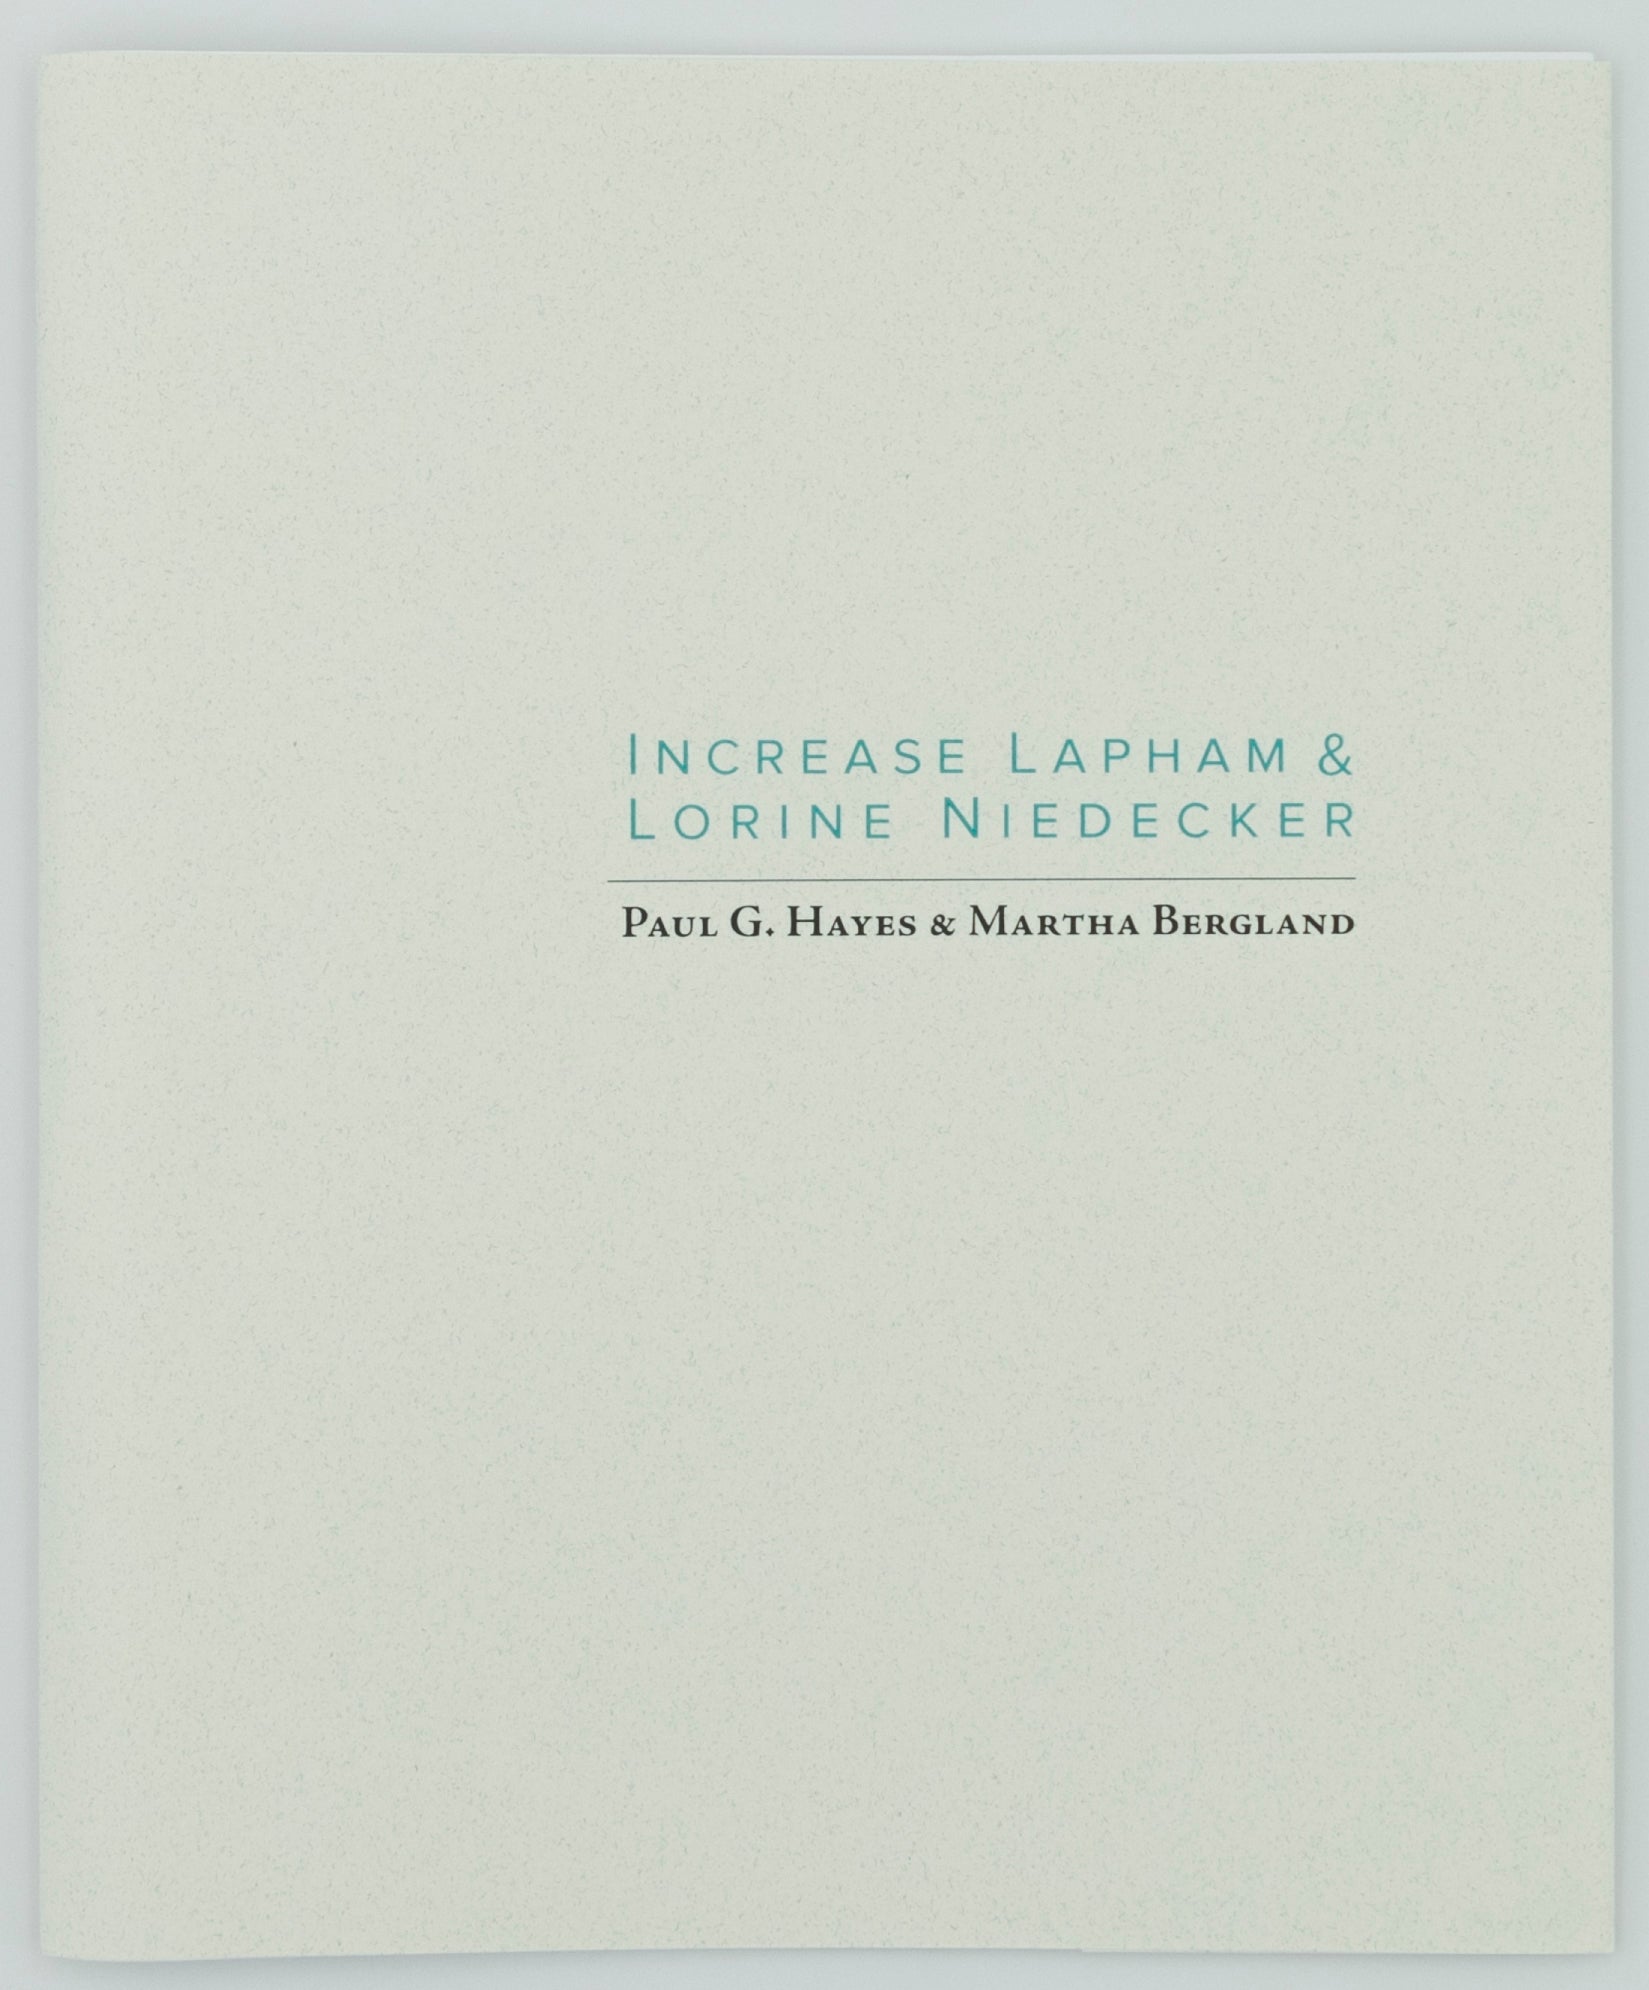 This zine is called Increase Lapham & Lorine Niedecker by Paul G. Hayes & Martha Bergland. Green and black text on light green paper